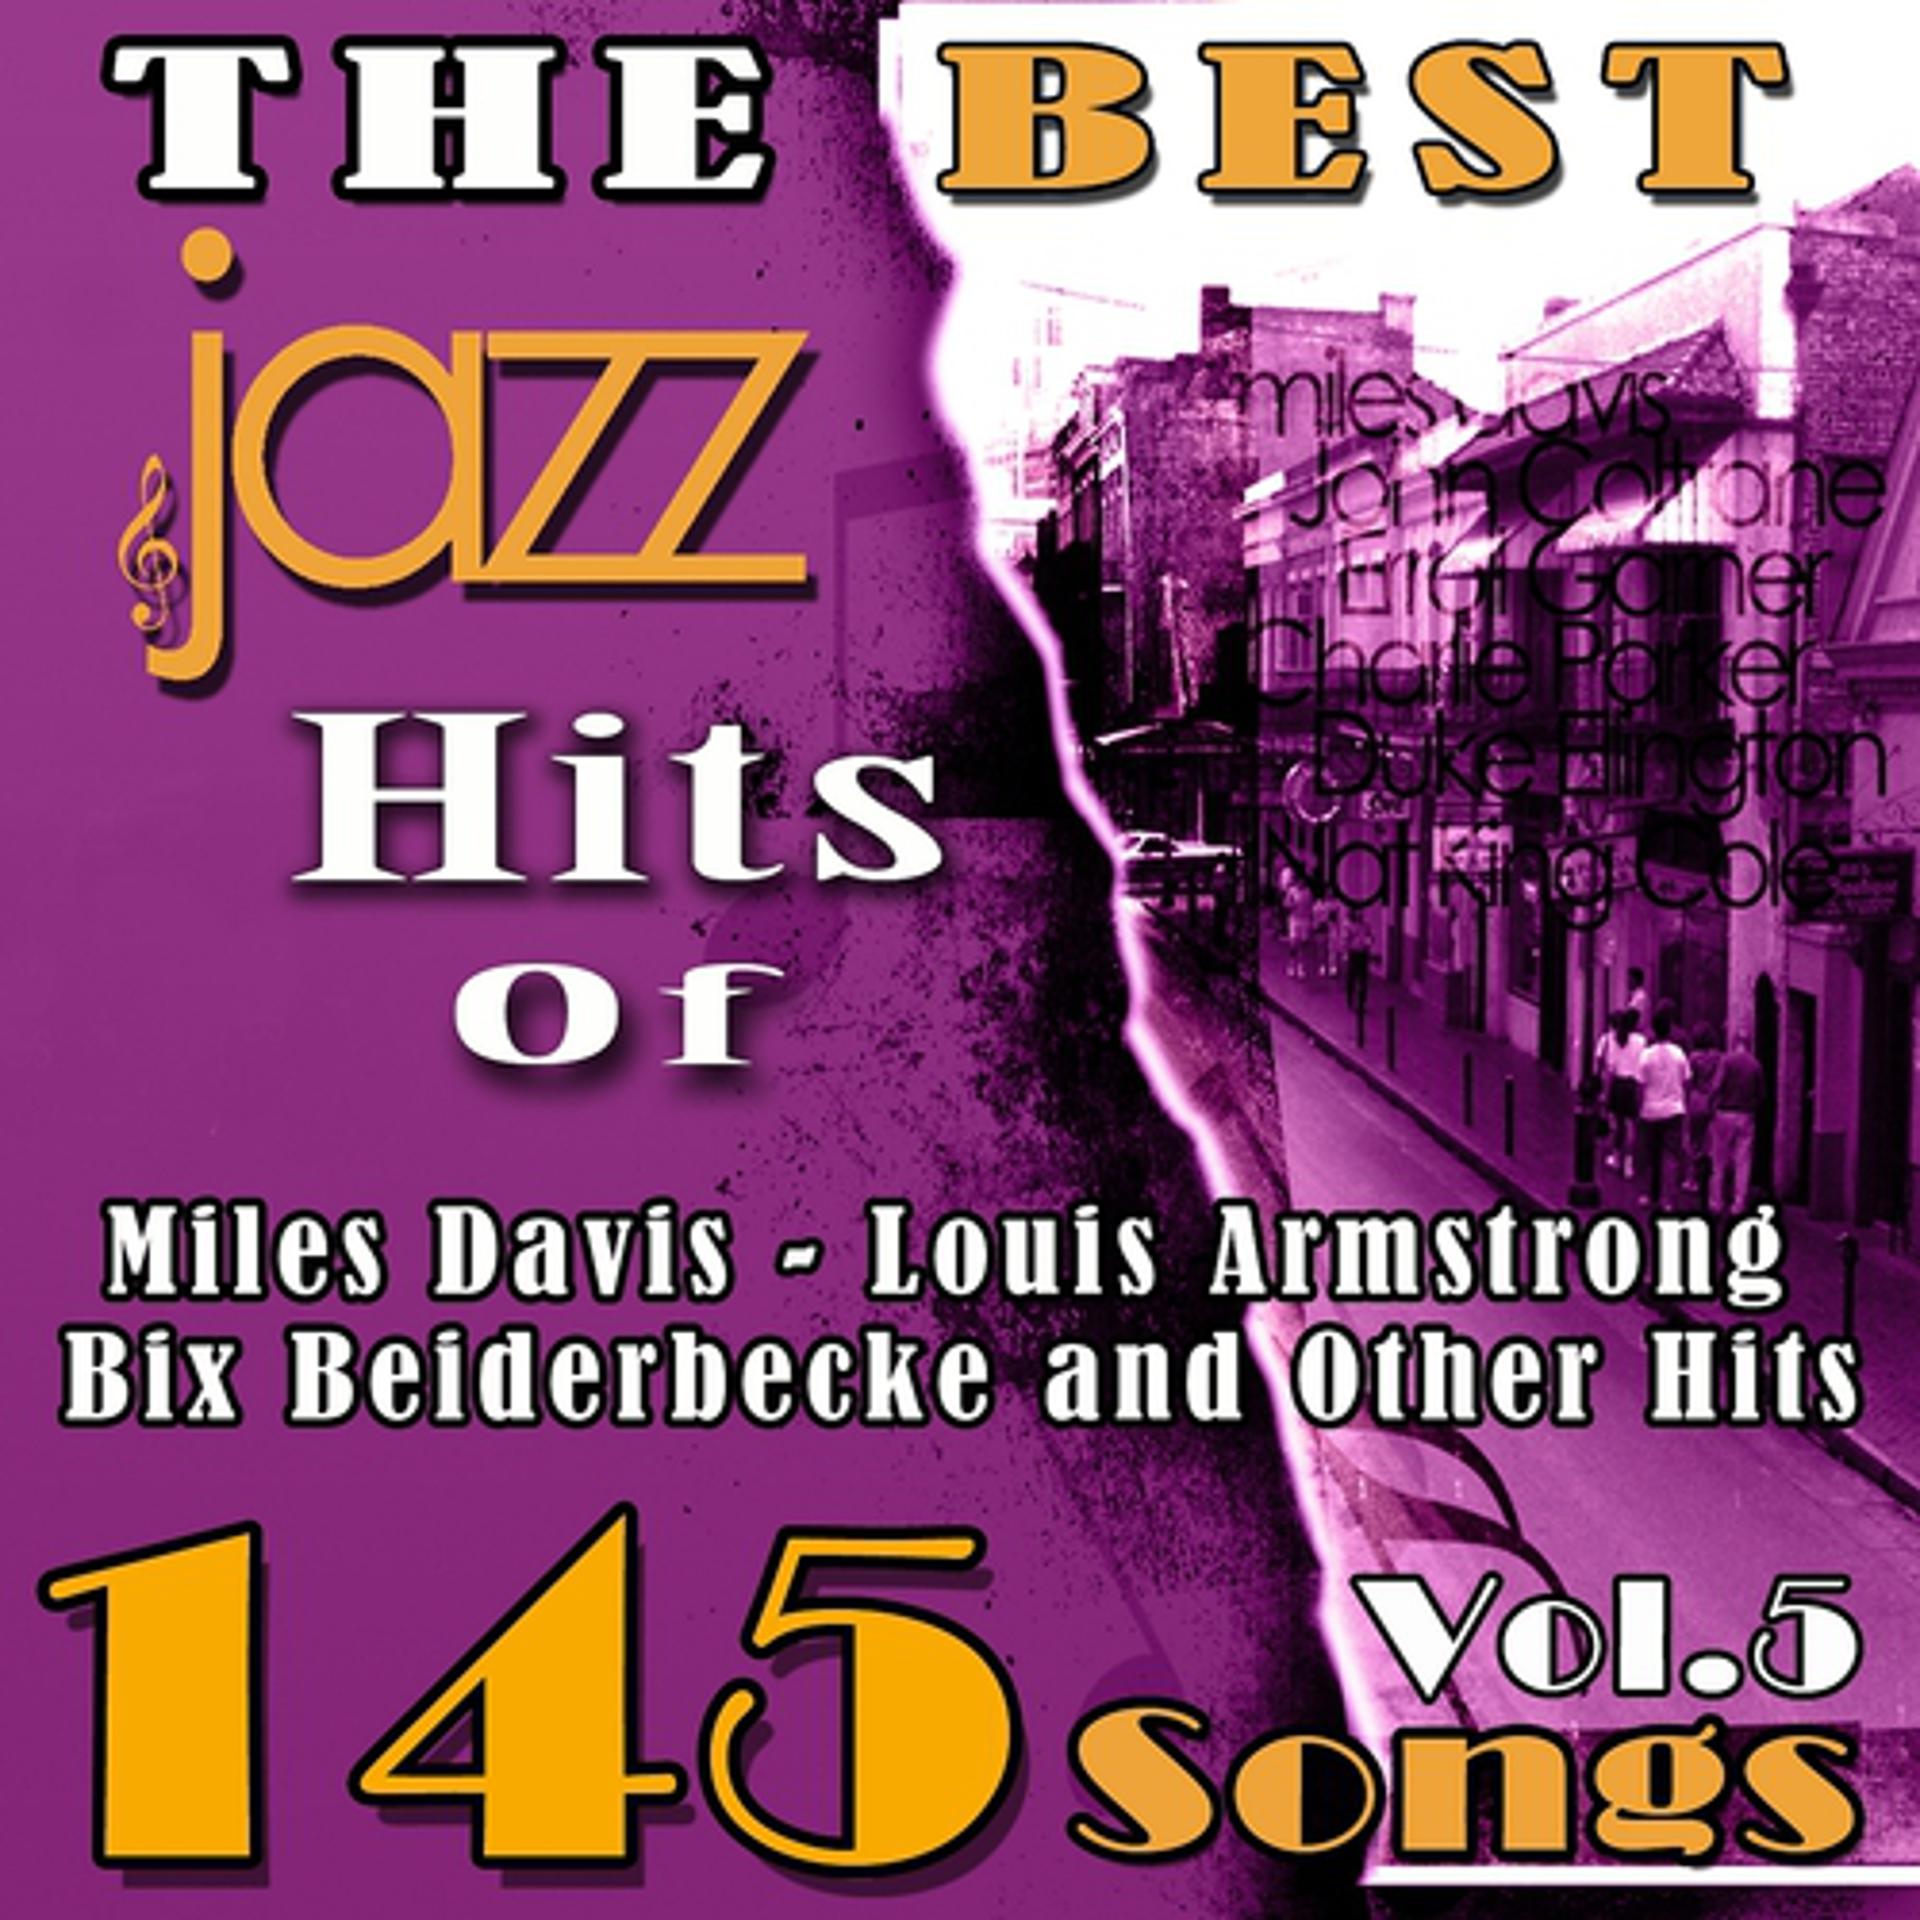 Постер альбома The Best Jazz Hits of Miles Davis, Louis Armstrong, Bix Beiderbecke and Other Hits, Vol. 5